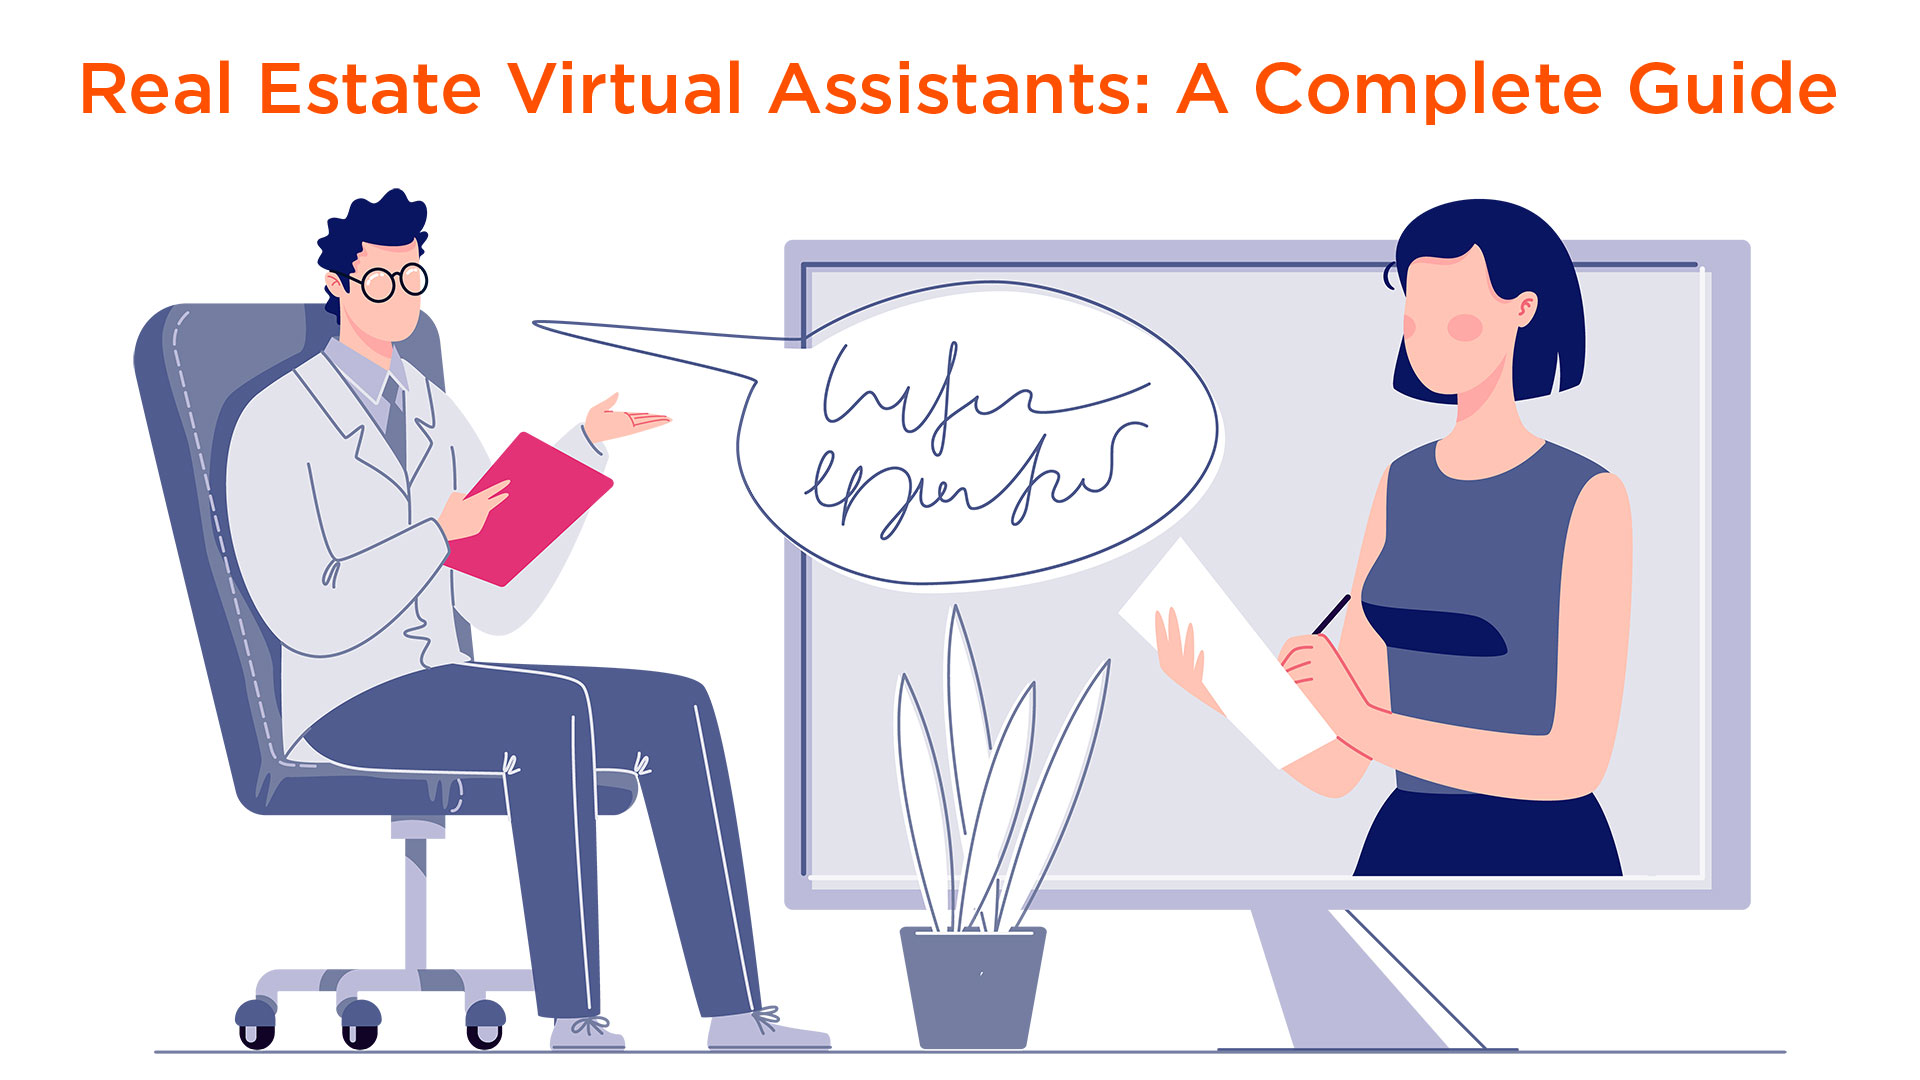 Real Estate Virtual Assistants: A Complete Guide